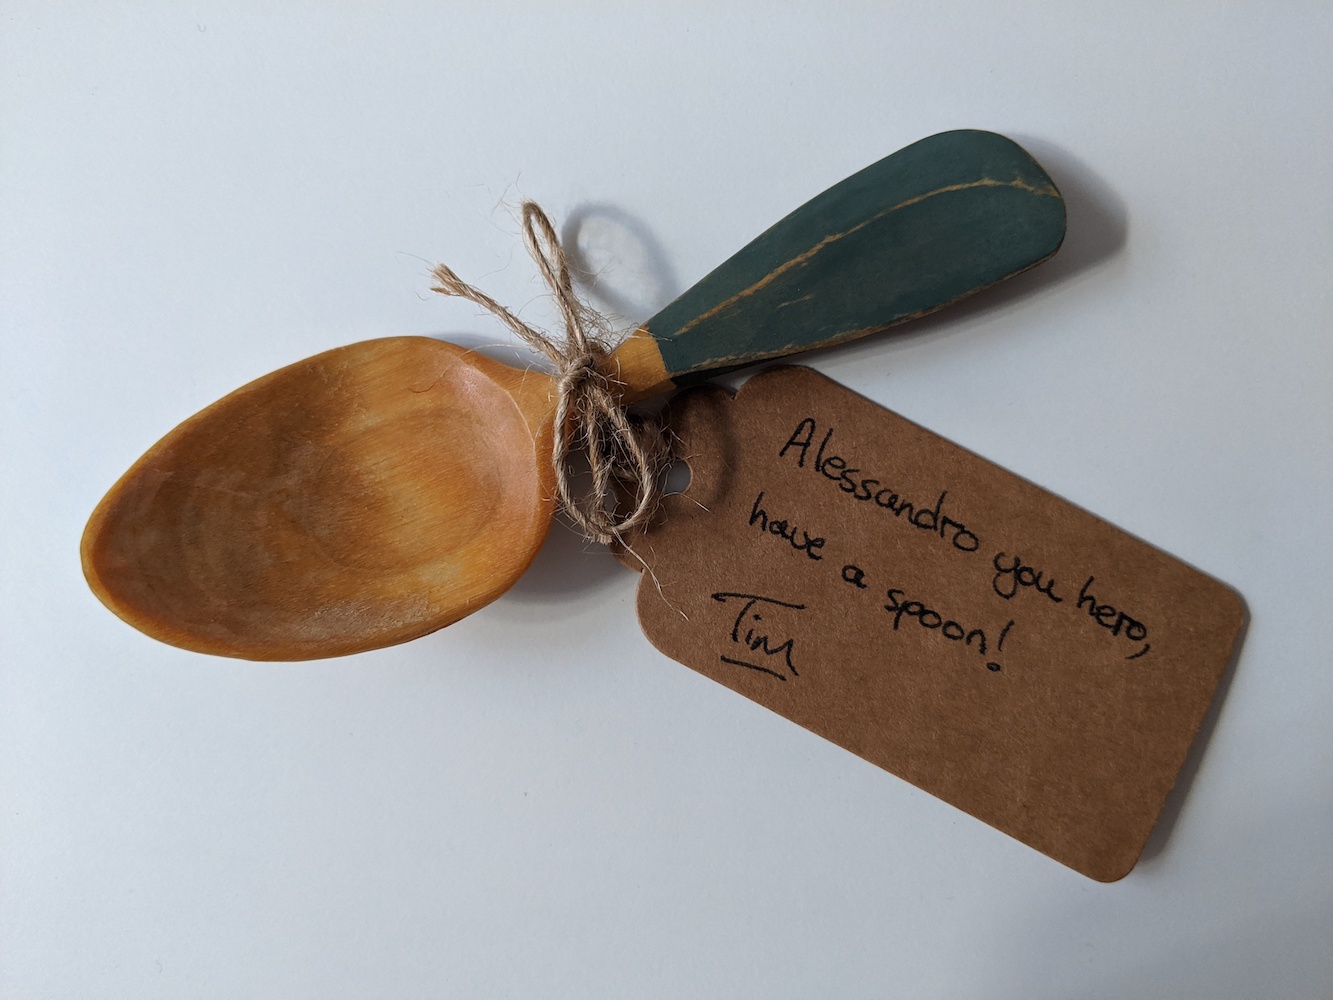 Hand-crafted wooden spoon by Tim.